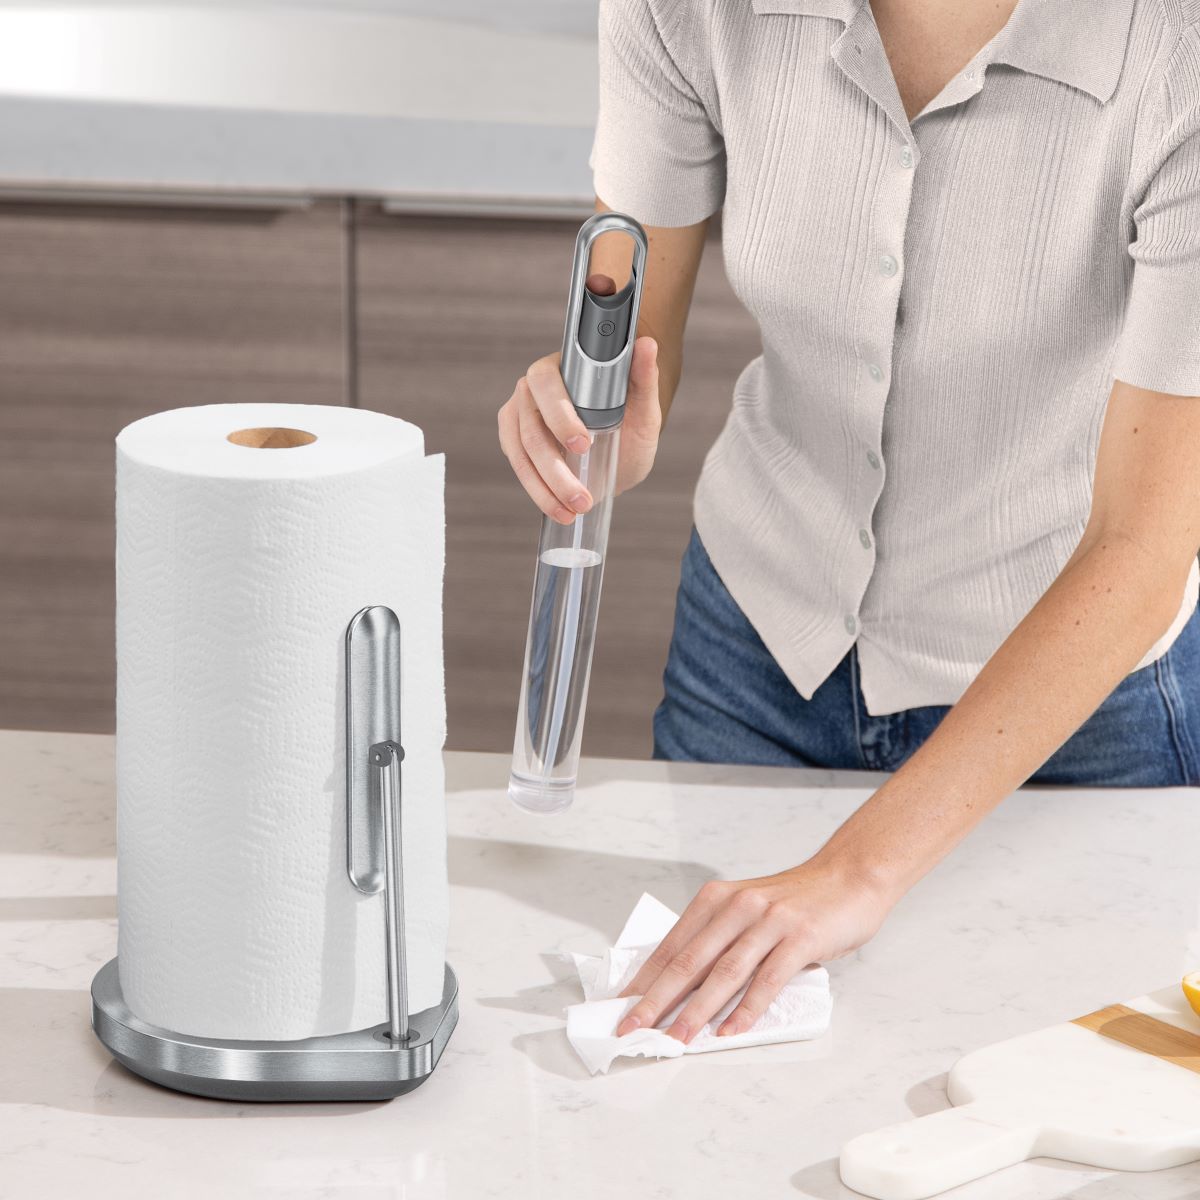 https://www.containerstore.com/catalogimages/483193/10093171-sh-paper-towel-spray-pump-s.jpg